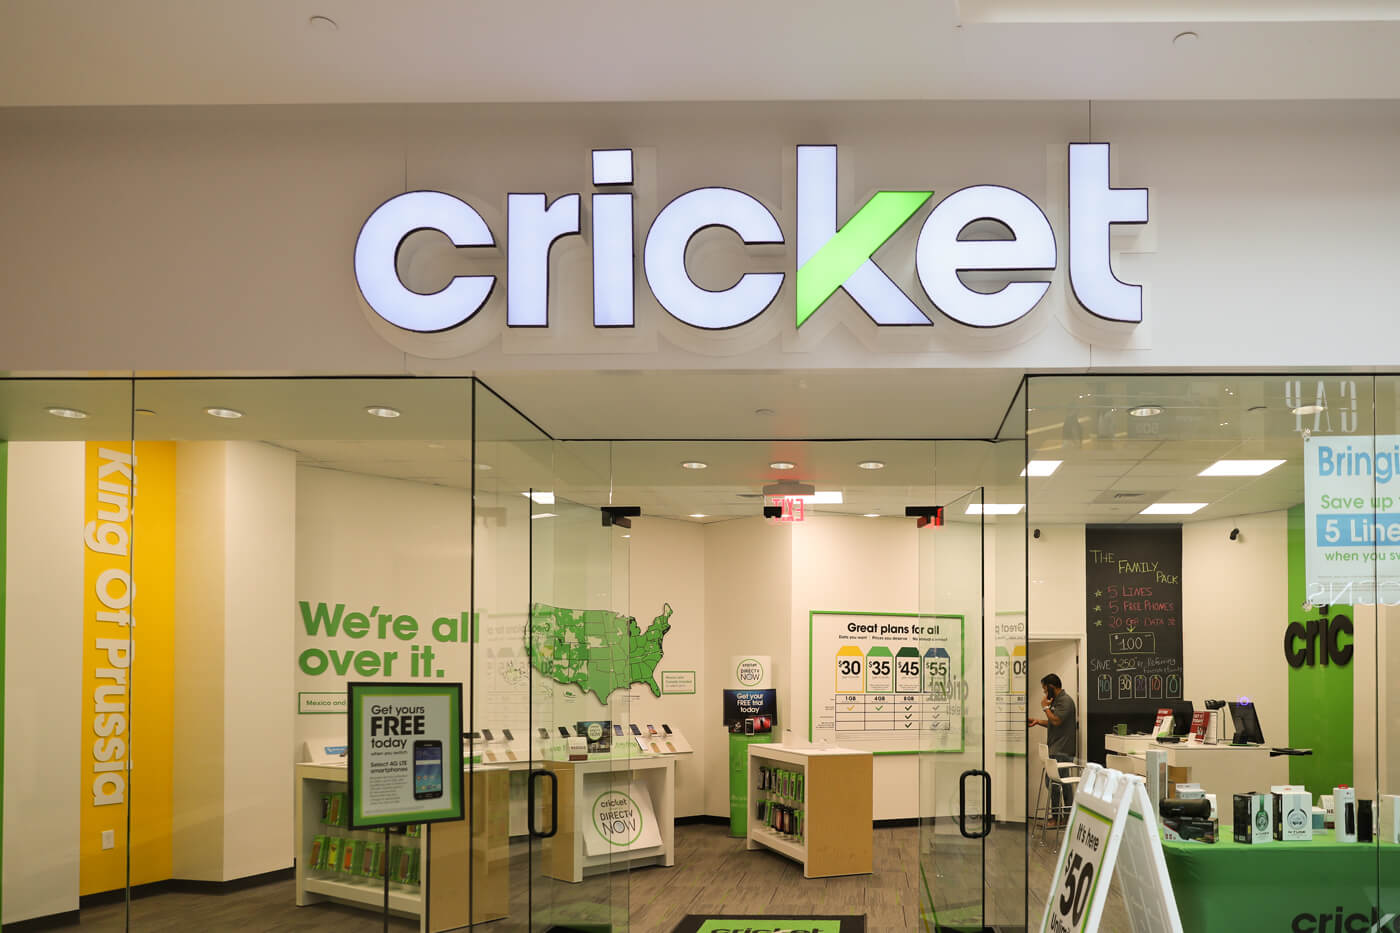 AT&T and Cricket match T-Mobile with cheaper $15 phone plans